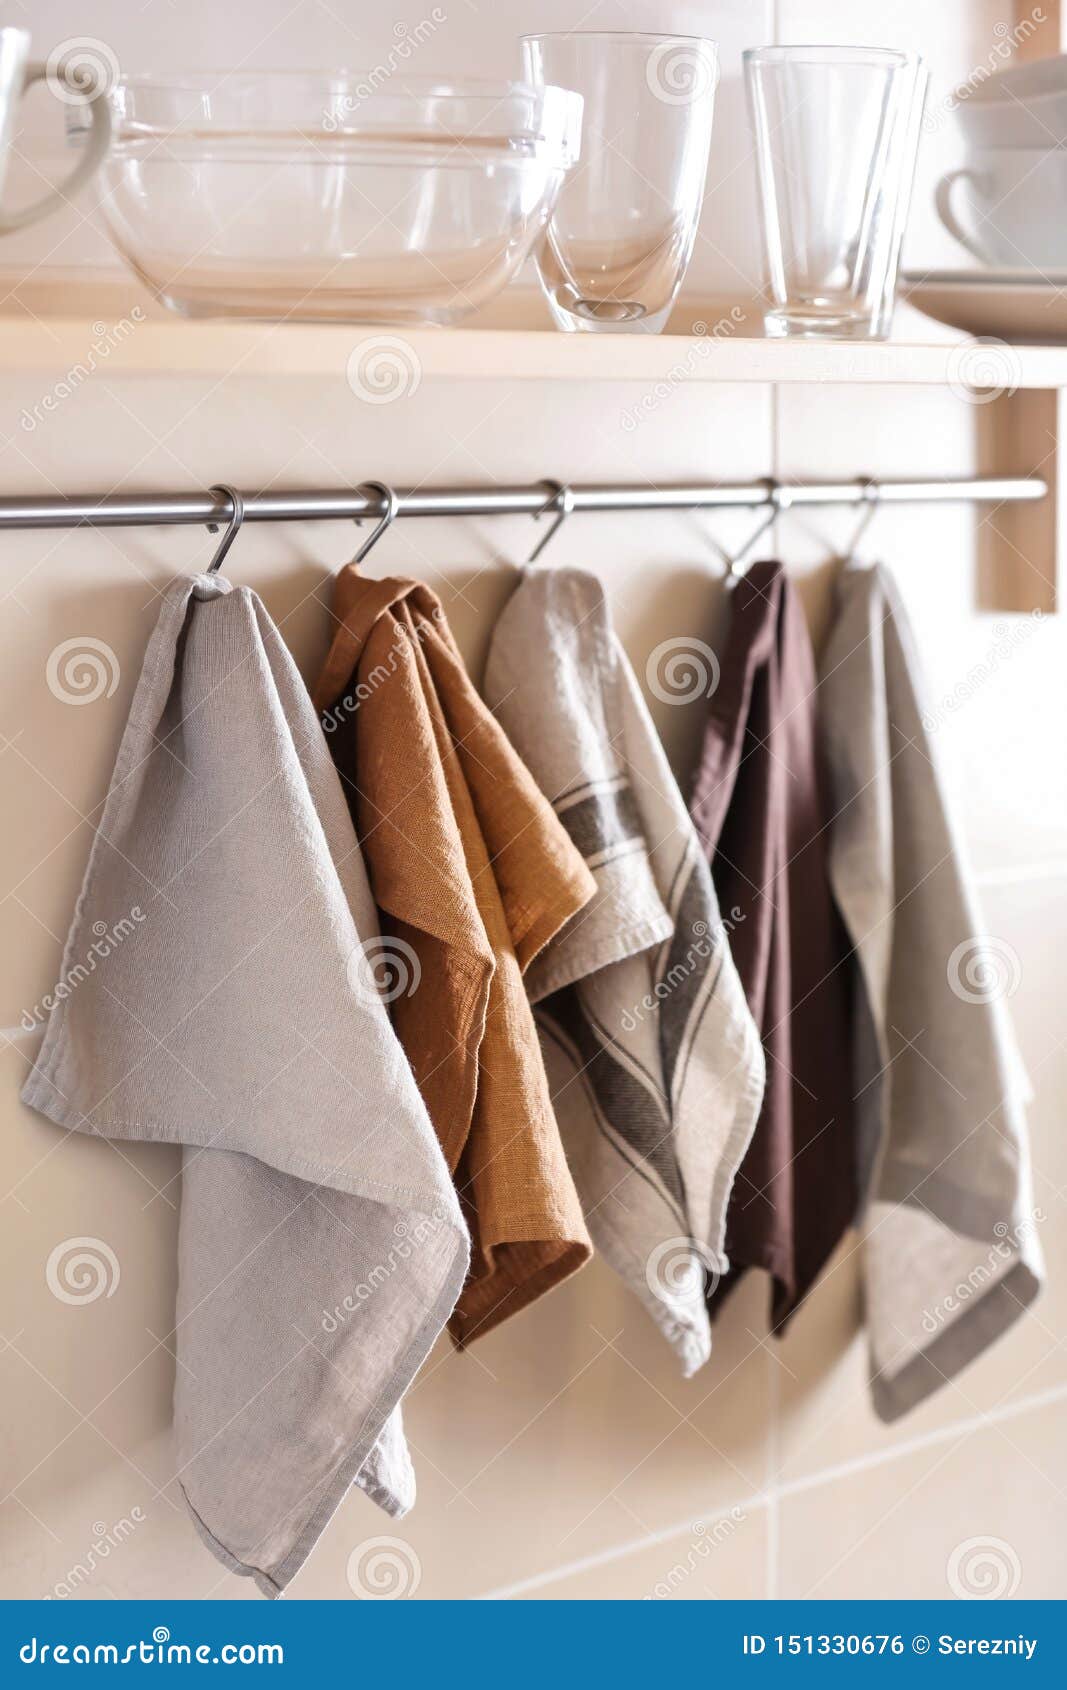 Clean kitchen towels and cleaning cloths 